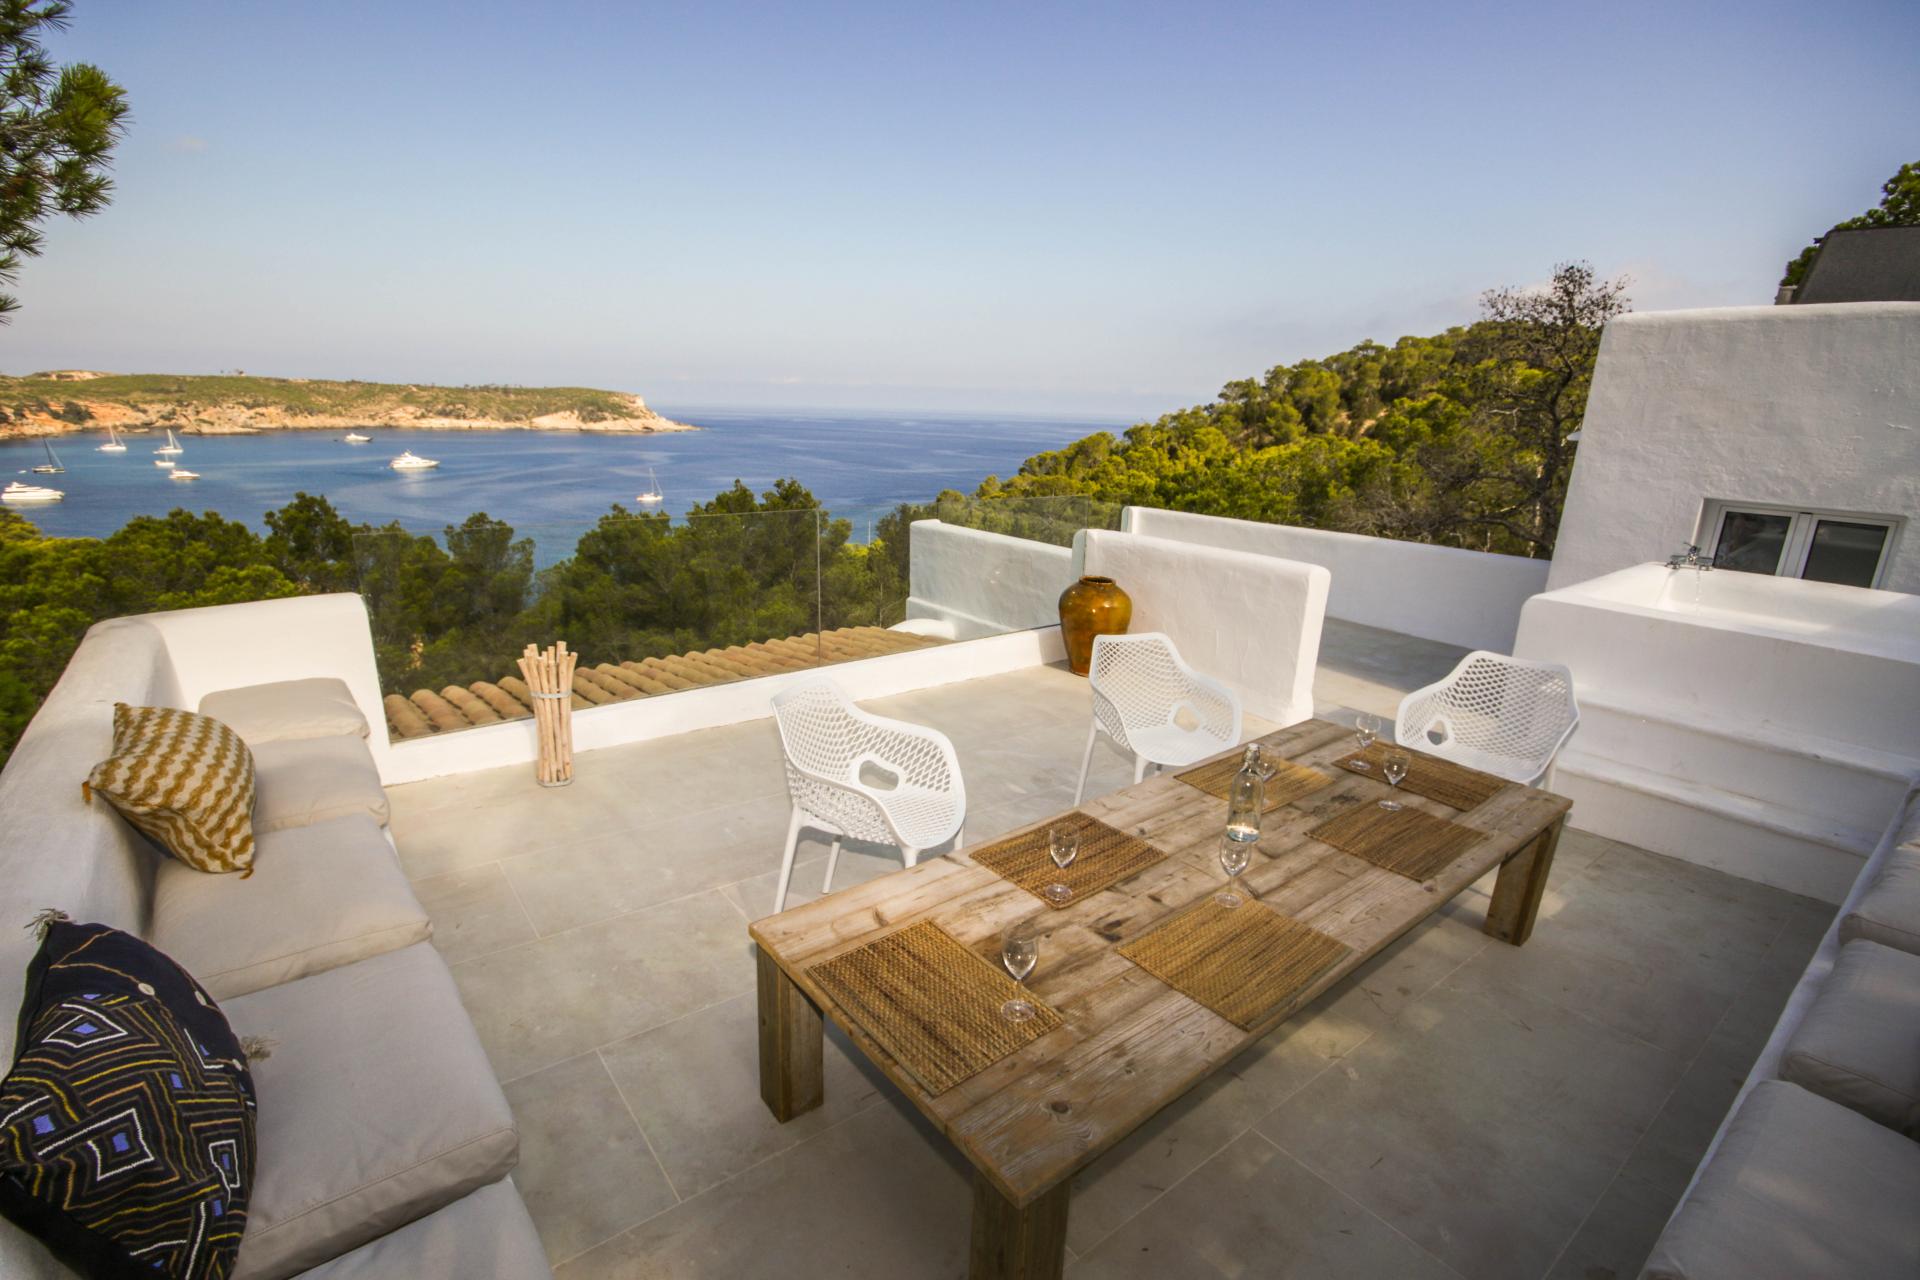 Cozy and romantic house in the north of Ibiza with splendid sunset view in Portinax